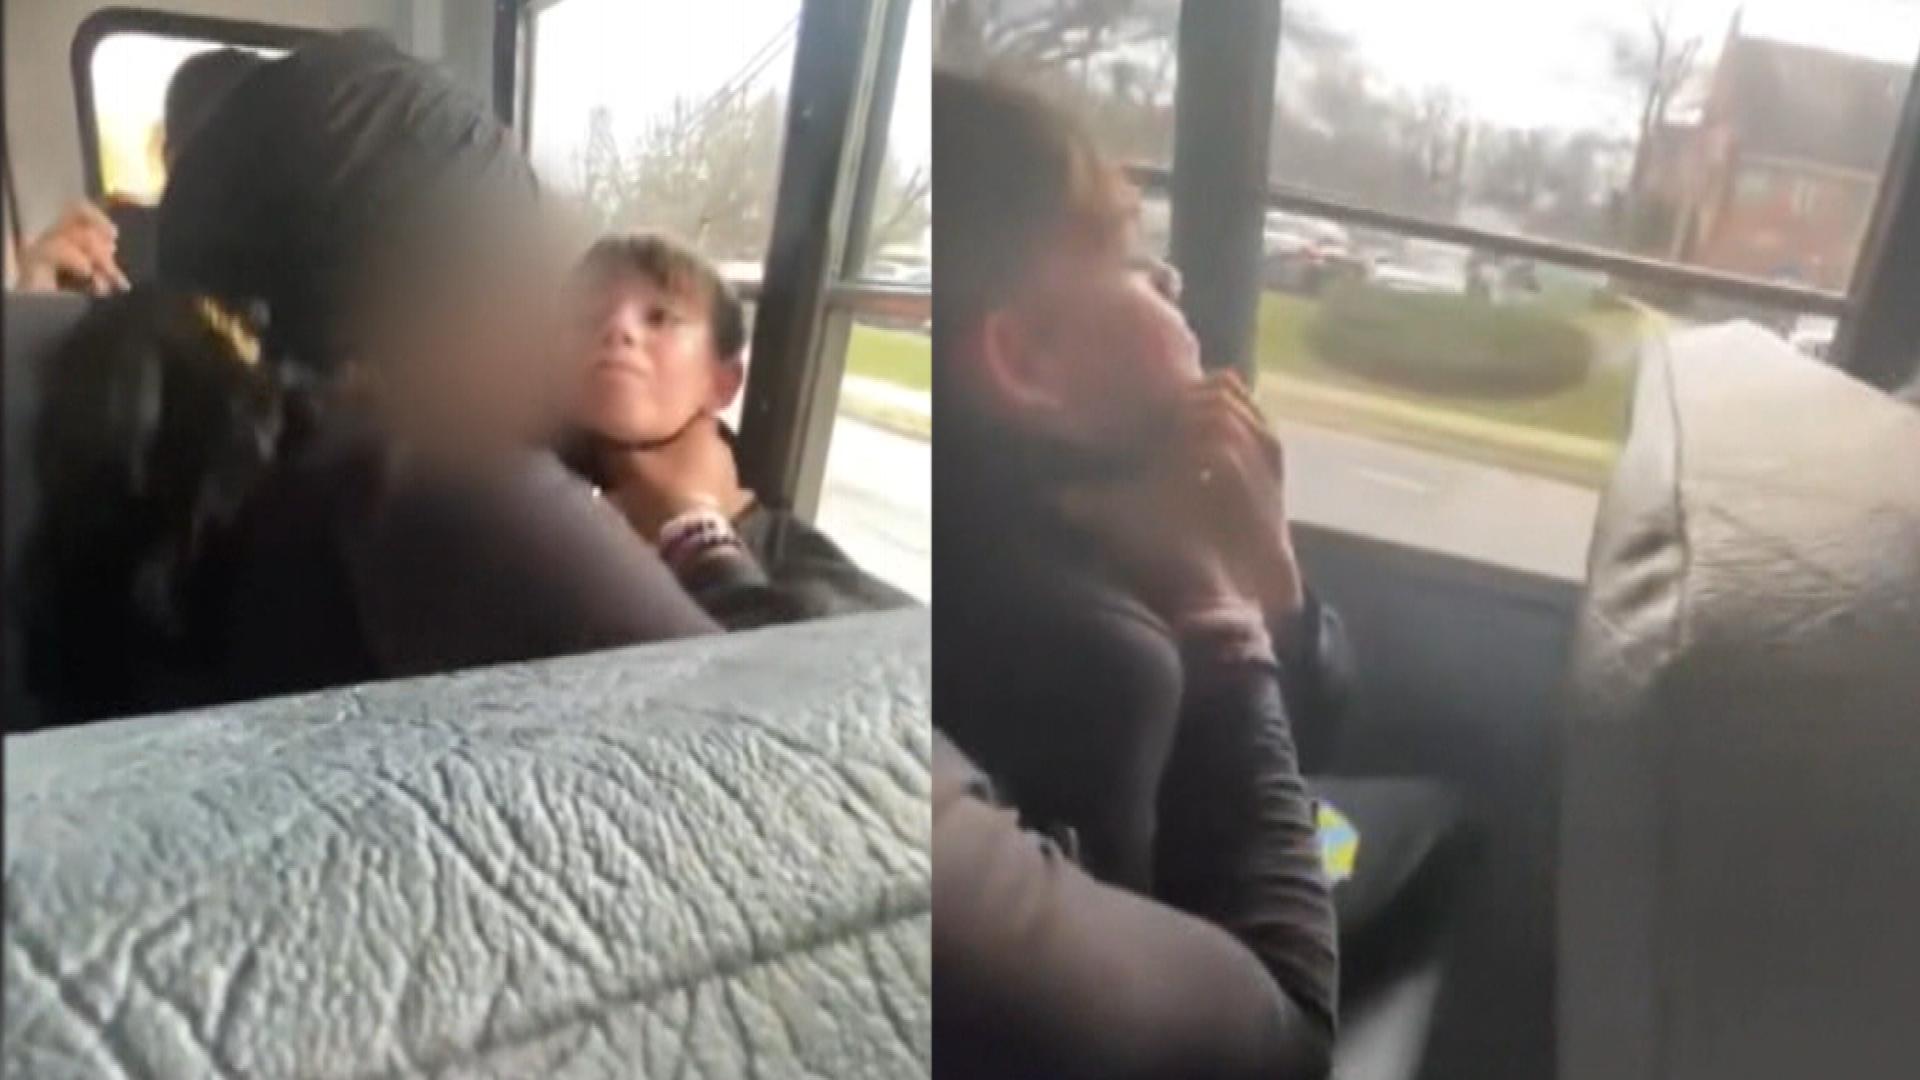 Schoolbusxxx - 12-Year-Old Boy Choked by Older Student on School Bus | Inside Edition